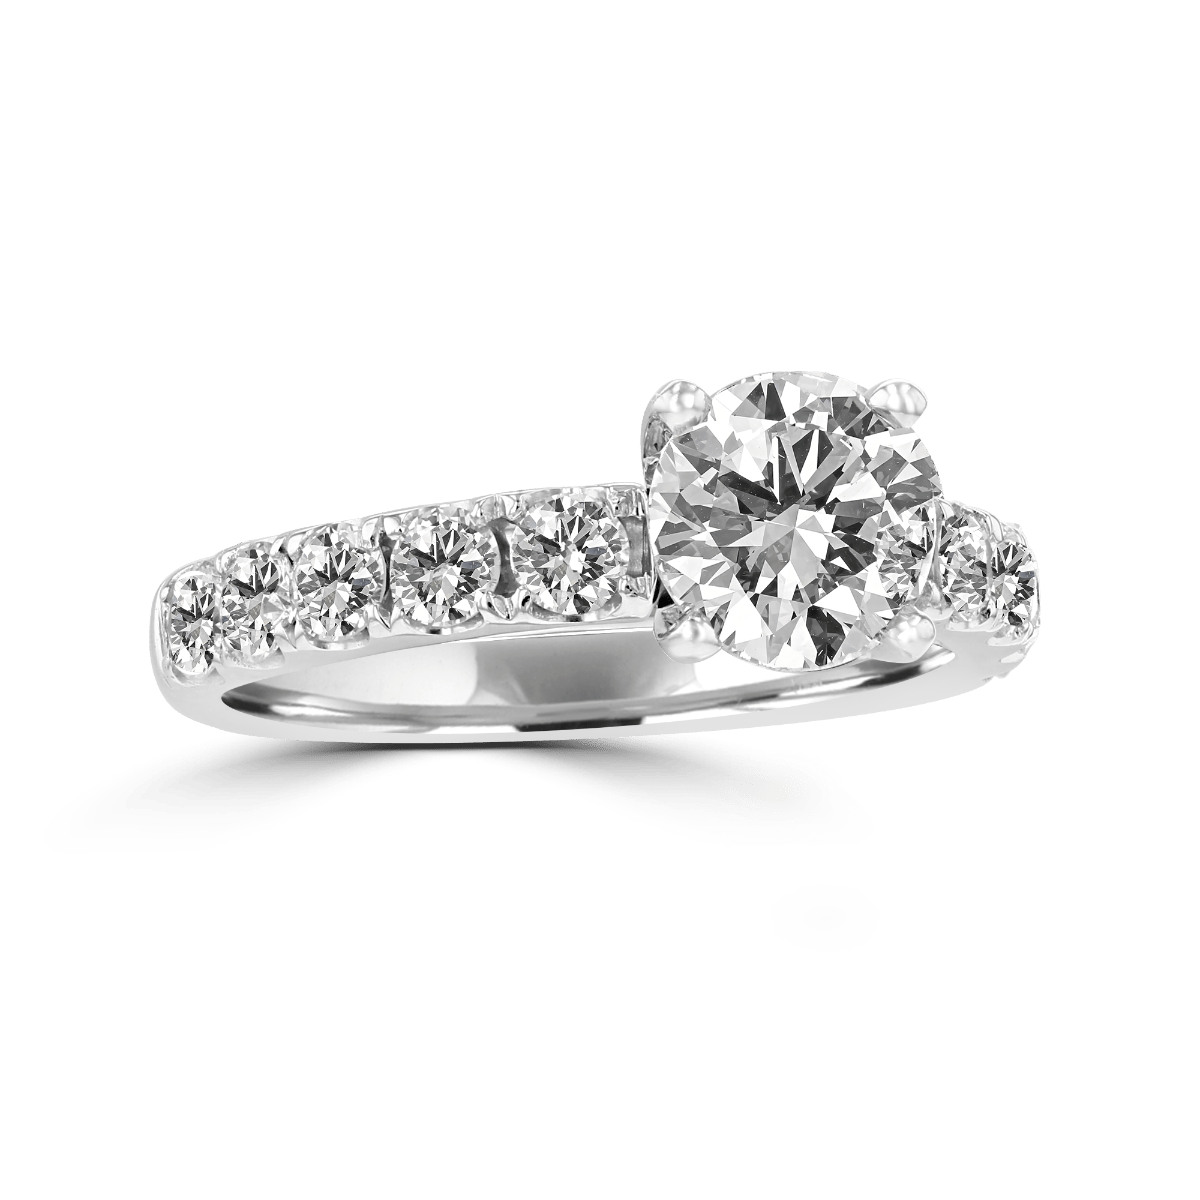 14KT 1 3/4 CTW Diamond Accent Ring with 1 CT Center Diamond I1 / 4,I1 / 4.5,I1 / 5,I1 / 5.5,I1 / 6,I1 / 6.5,I1 / 7,I1 / 7.5,I1 / 8,I1 / 8.5,I1 / 9,SI / 4,SI / 4.5,SI / 5,SI / 5.5,SI / 6,SI / 6.5,SI / 7,SI / 7.5,SI / 8,SI / 8.5,SI / 9,VS / 4,VS / 4.5,VS / 5,VS / 5.5,VS / 6,VS / 6.5,VS / 7,VS / 7.5,VS / 8,VS / 8.5,VS / 9